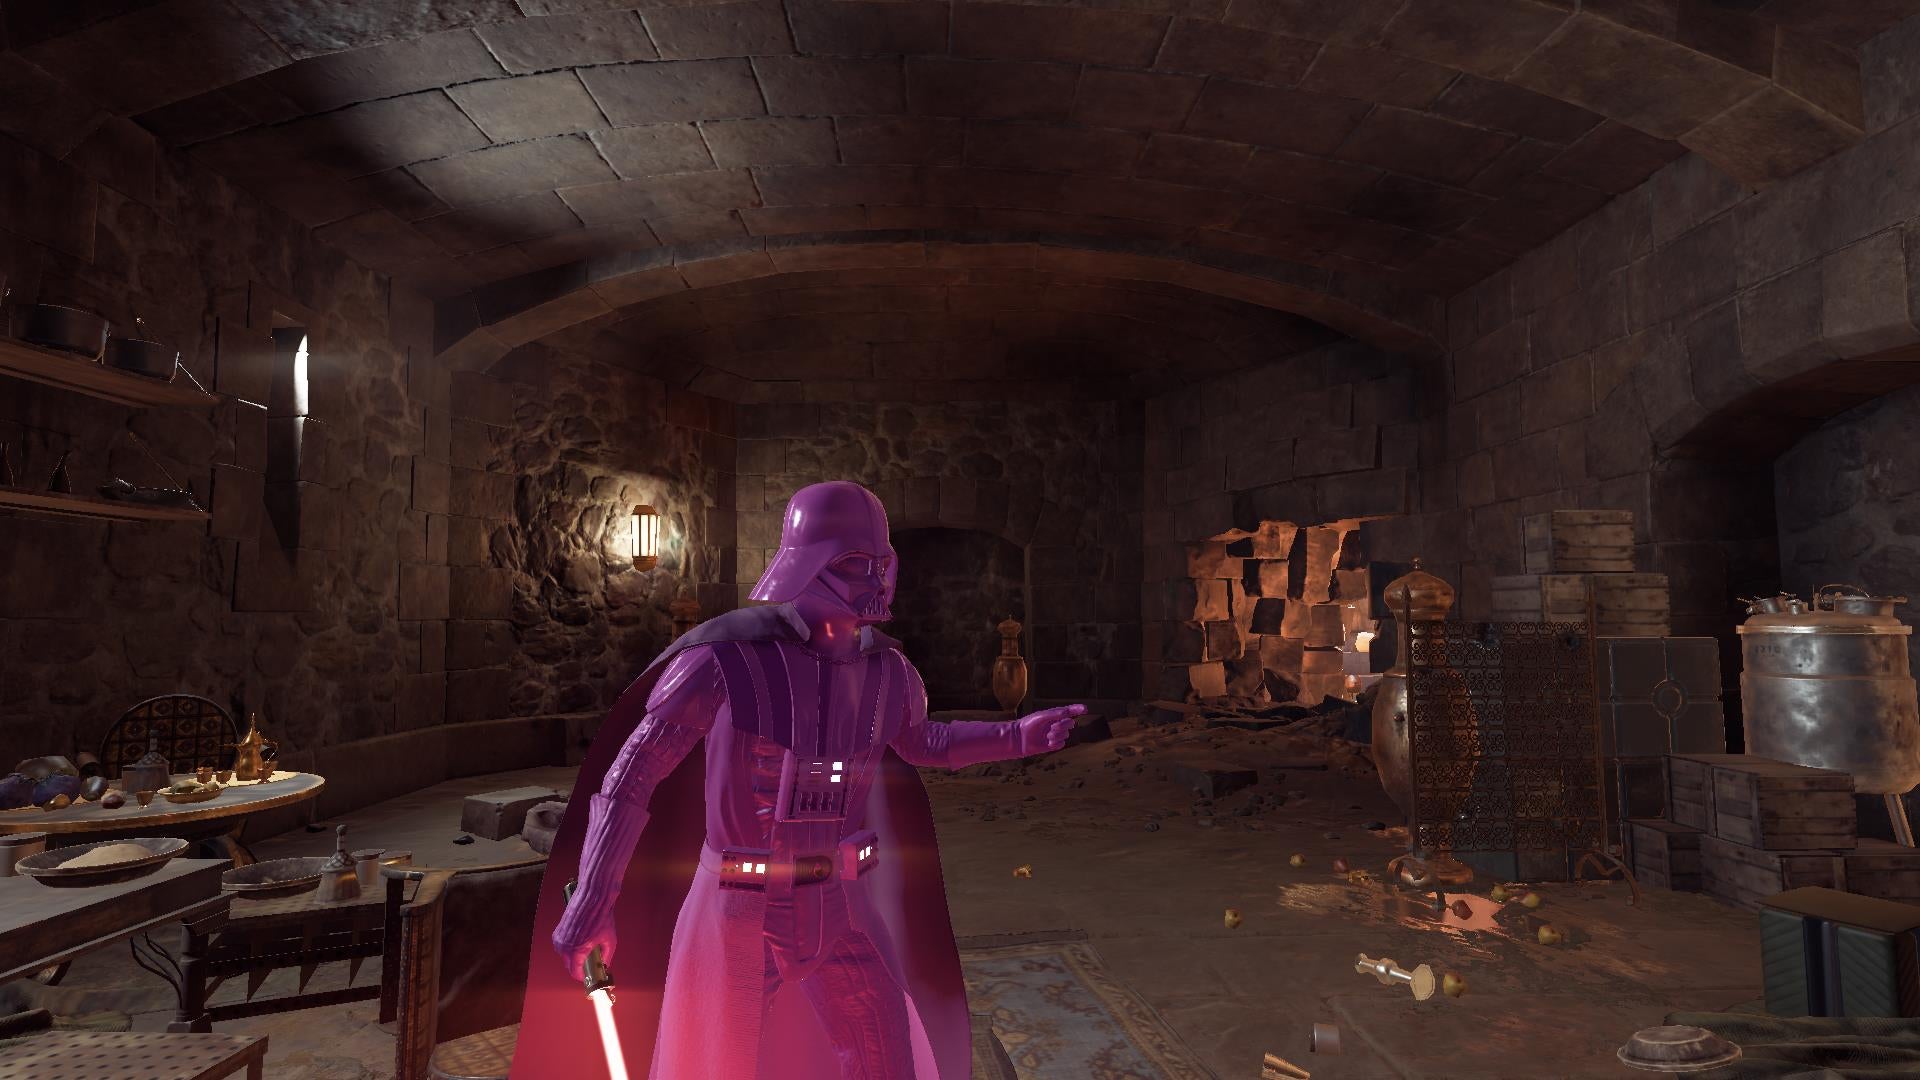 Image for Star Wars: Battlefront 2 mods let you play as pink Darth Vader, Matt the radar technician from that SNL skit